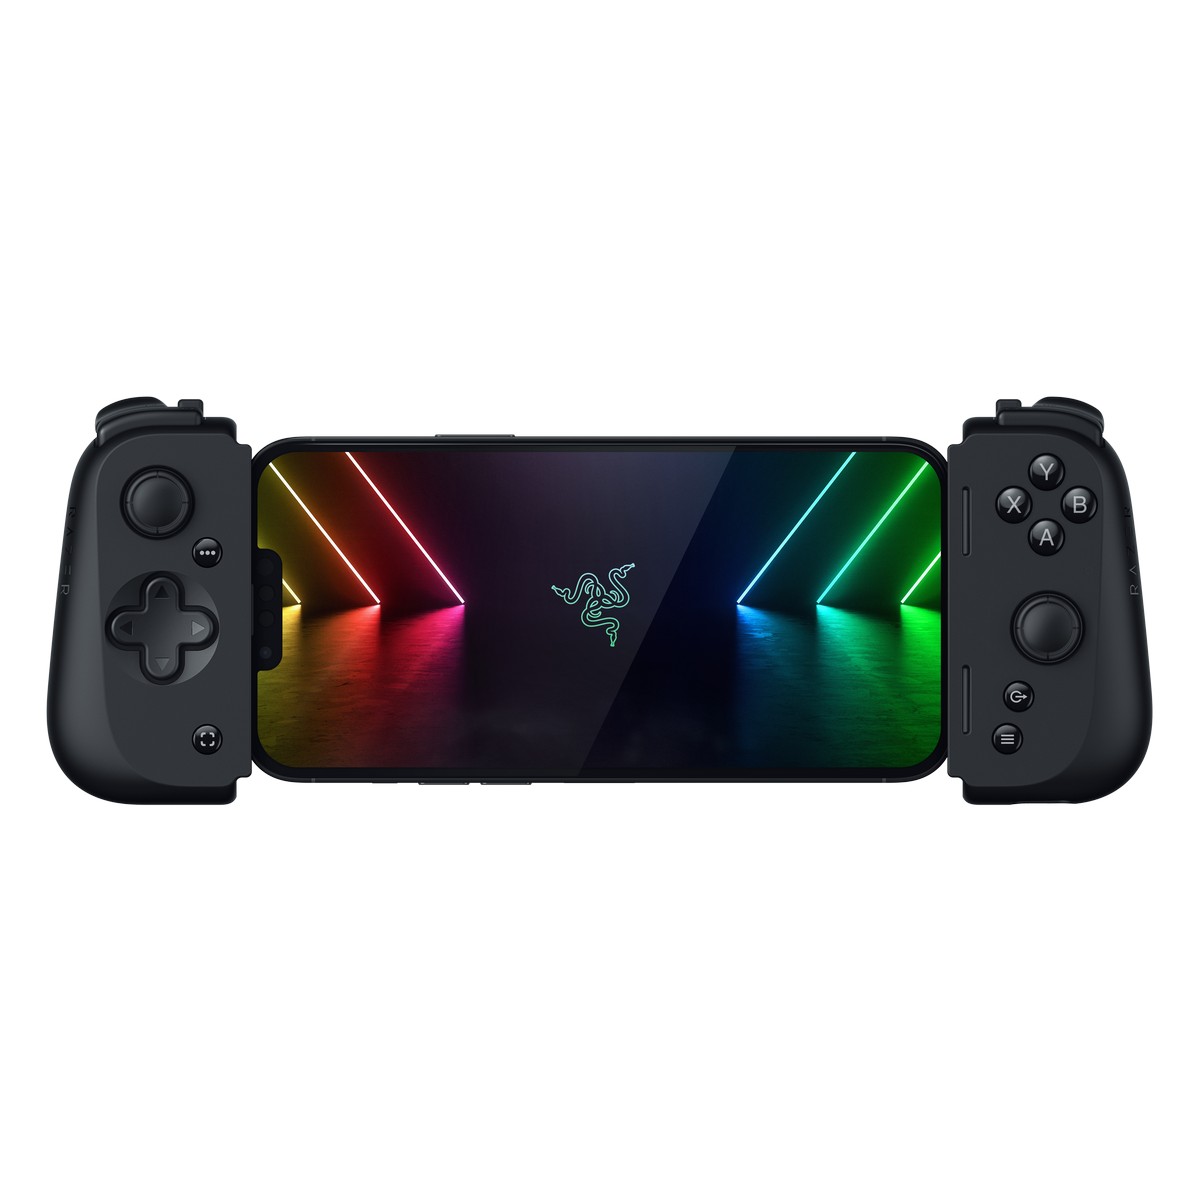 Razer Kishi V2 for iPhone Mobile PC/Console Game Controller (RZ06-04190100-R3M1)